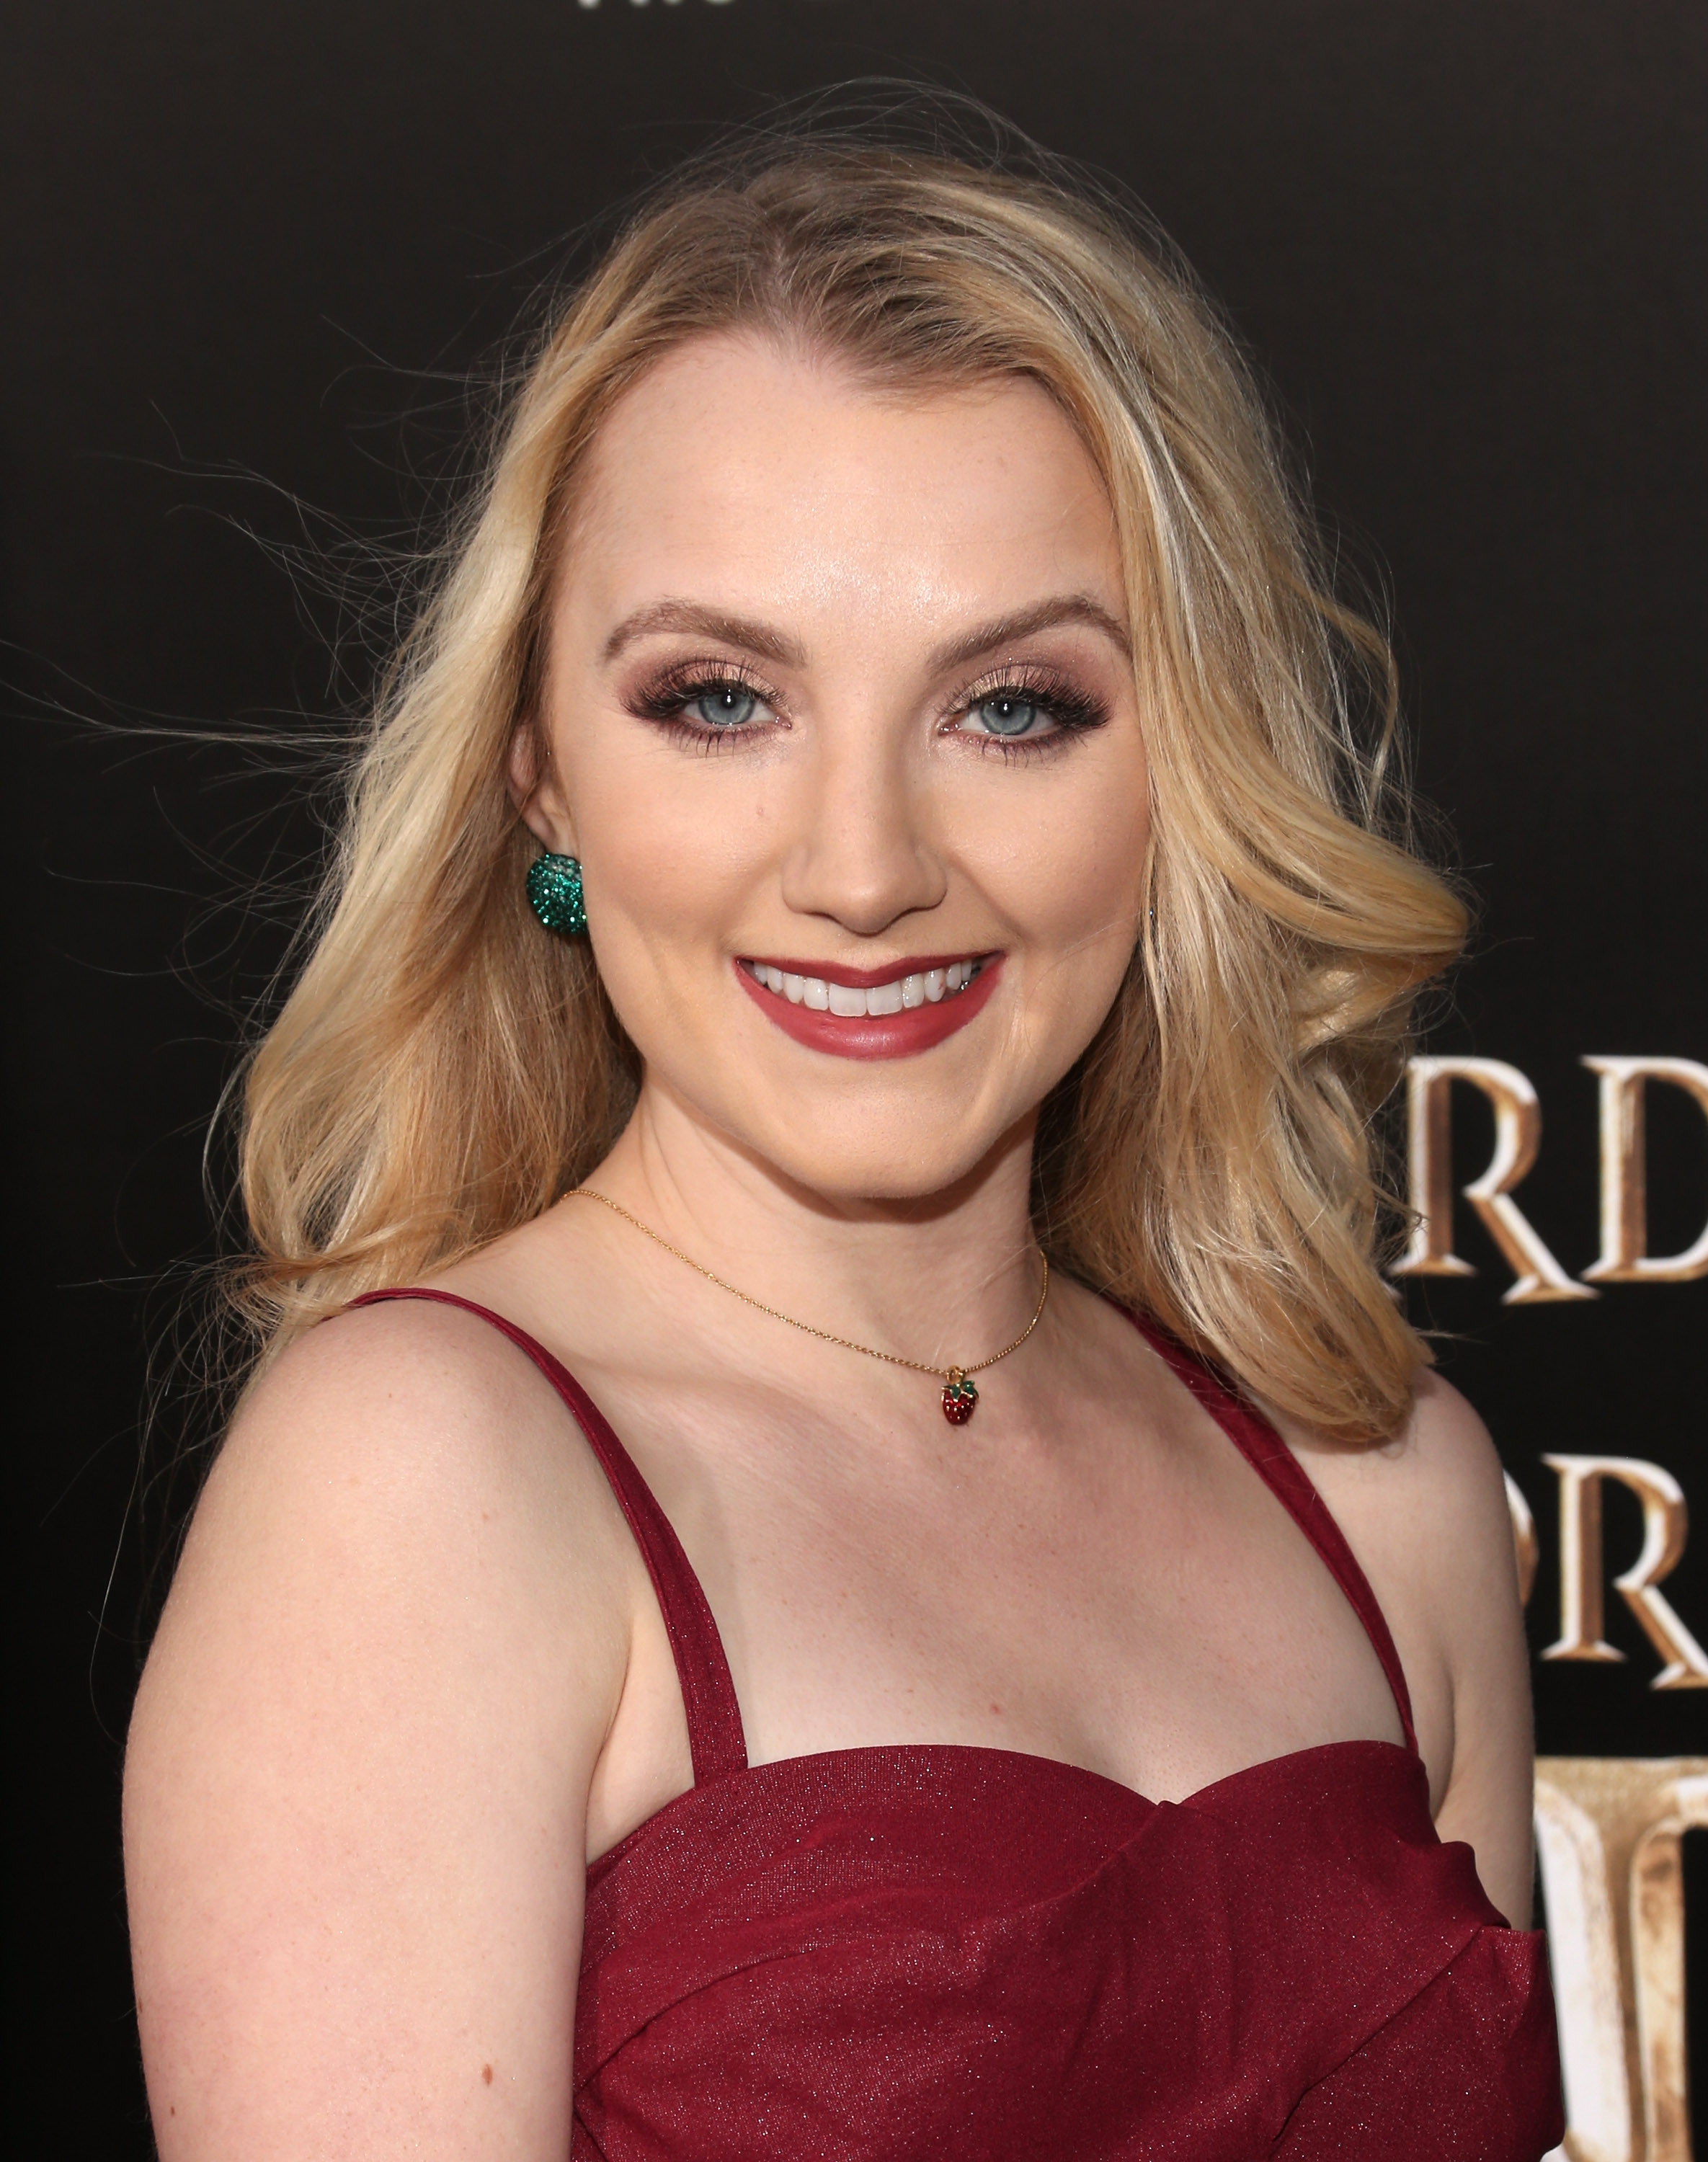 Evanna Lynch attends the opening of "The Wizarding World of Harry Potter" at Universal Studios Hollywood on April 5, 2016, in Universal City, California. | Source: Getty Images